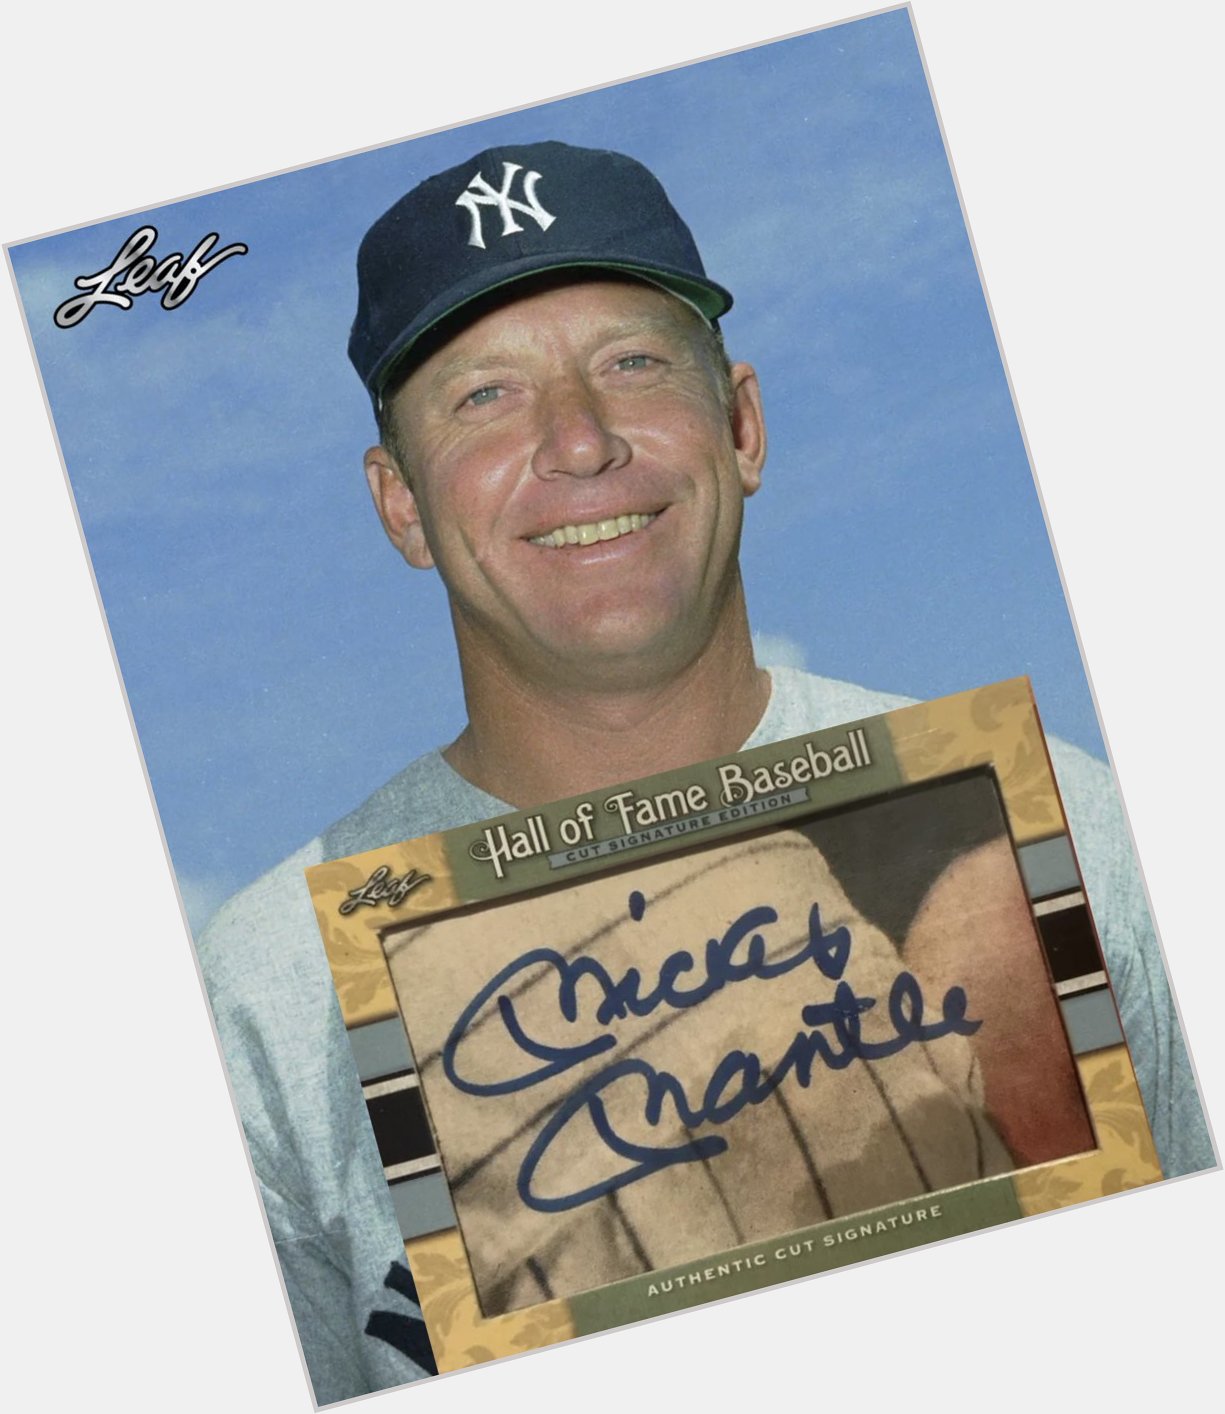 Happy Birthday to Mickey Mantle, who would\ve turned 91 today 